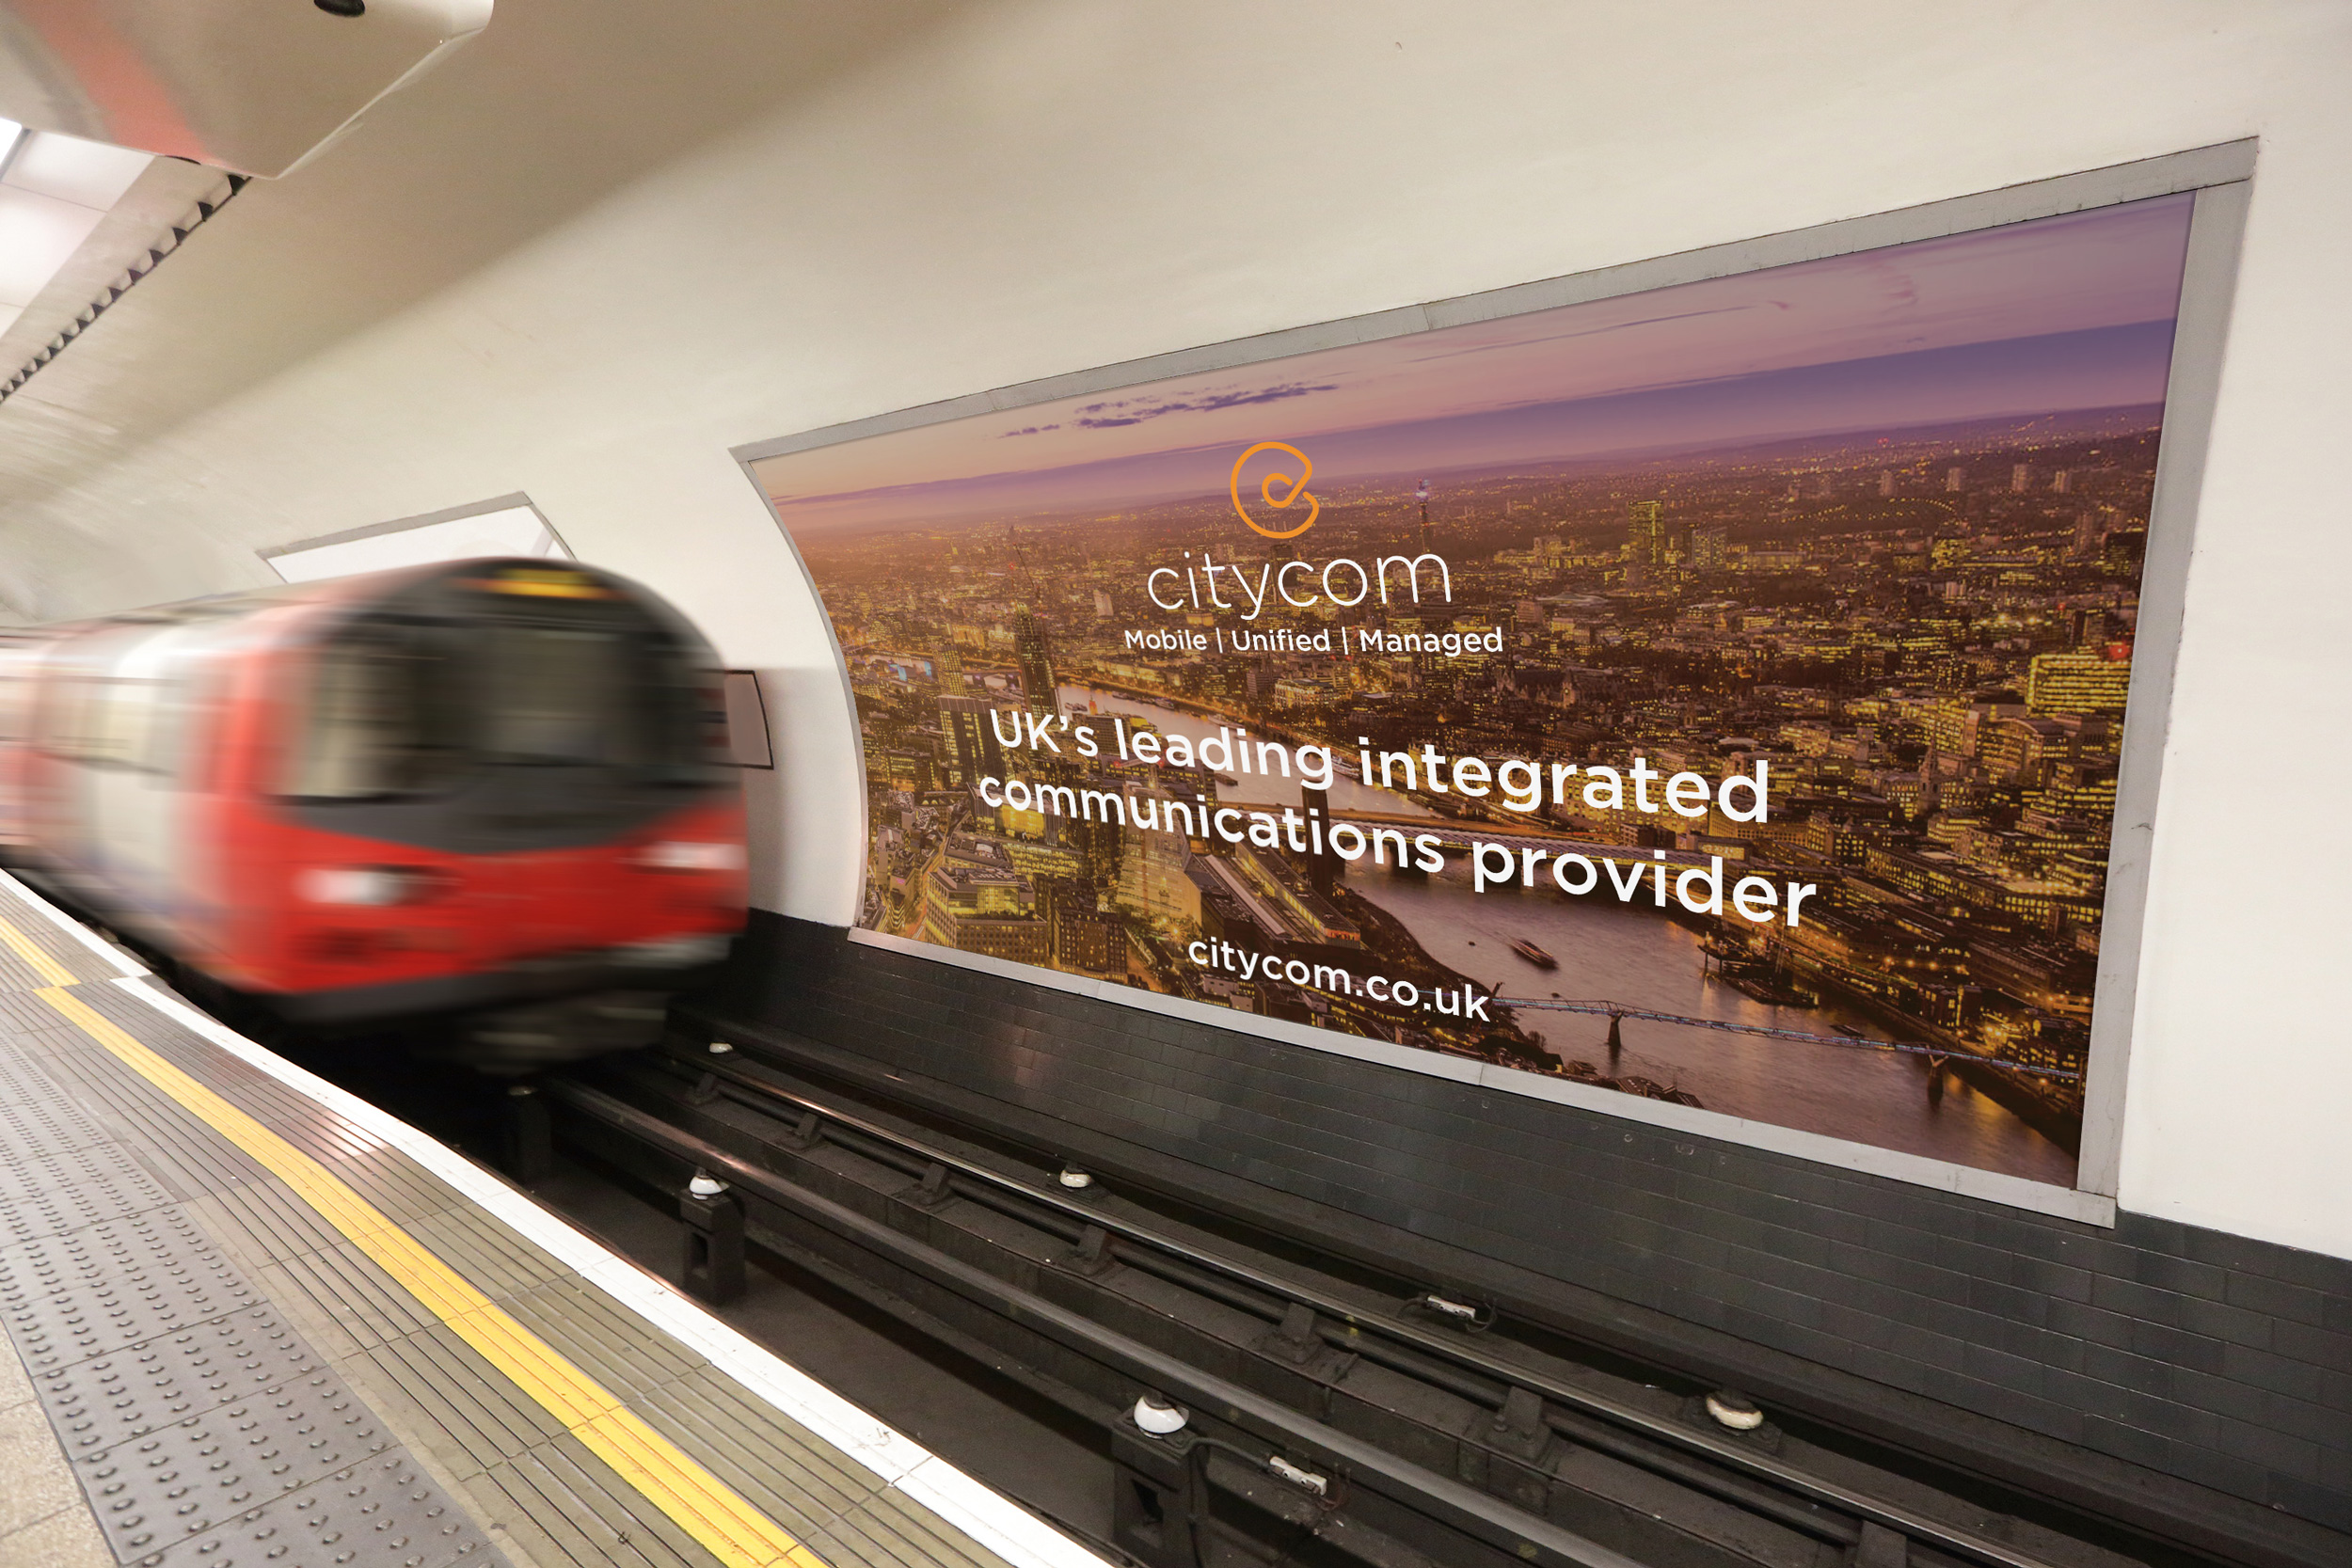 Citycom advert on a billboard at a London Underground platform as a tube train pulls in